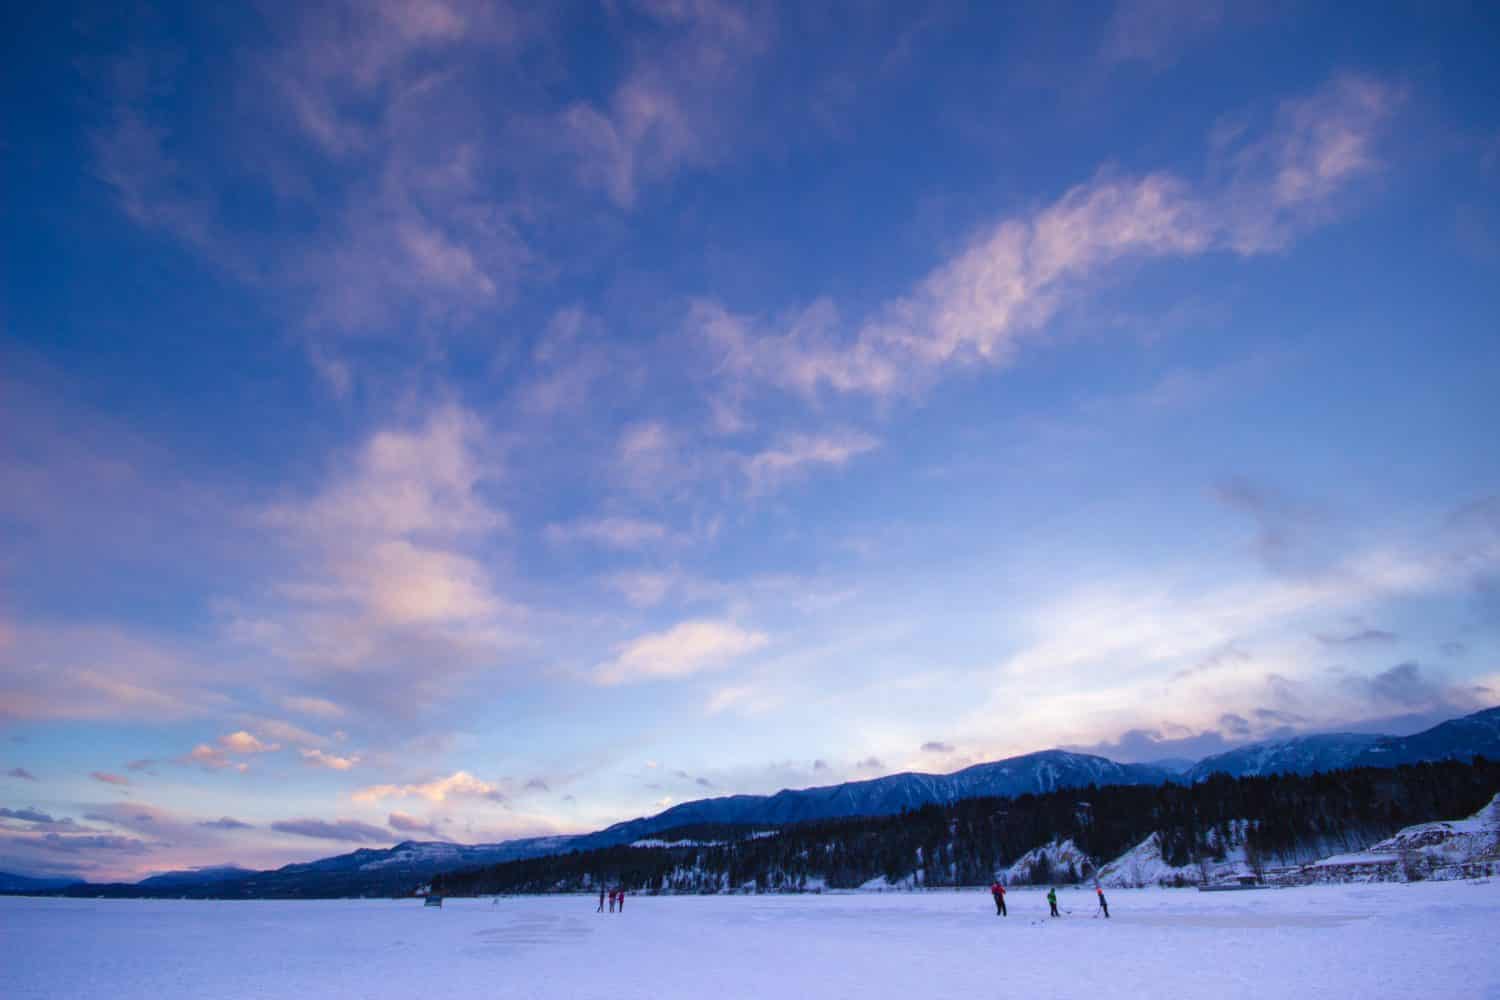 The ice skating track between Invermere and Windermere in British Columbia, Canada